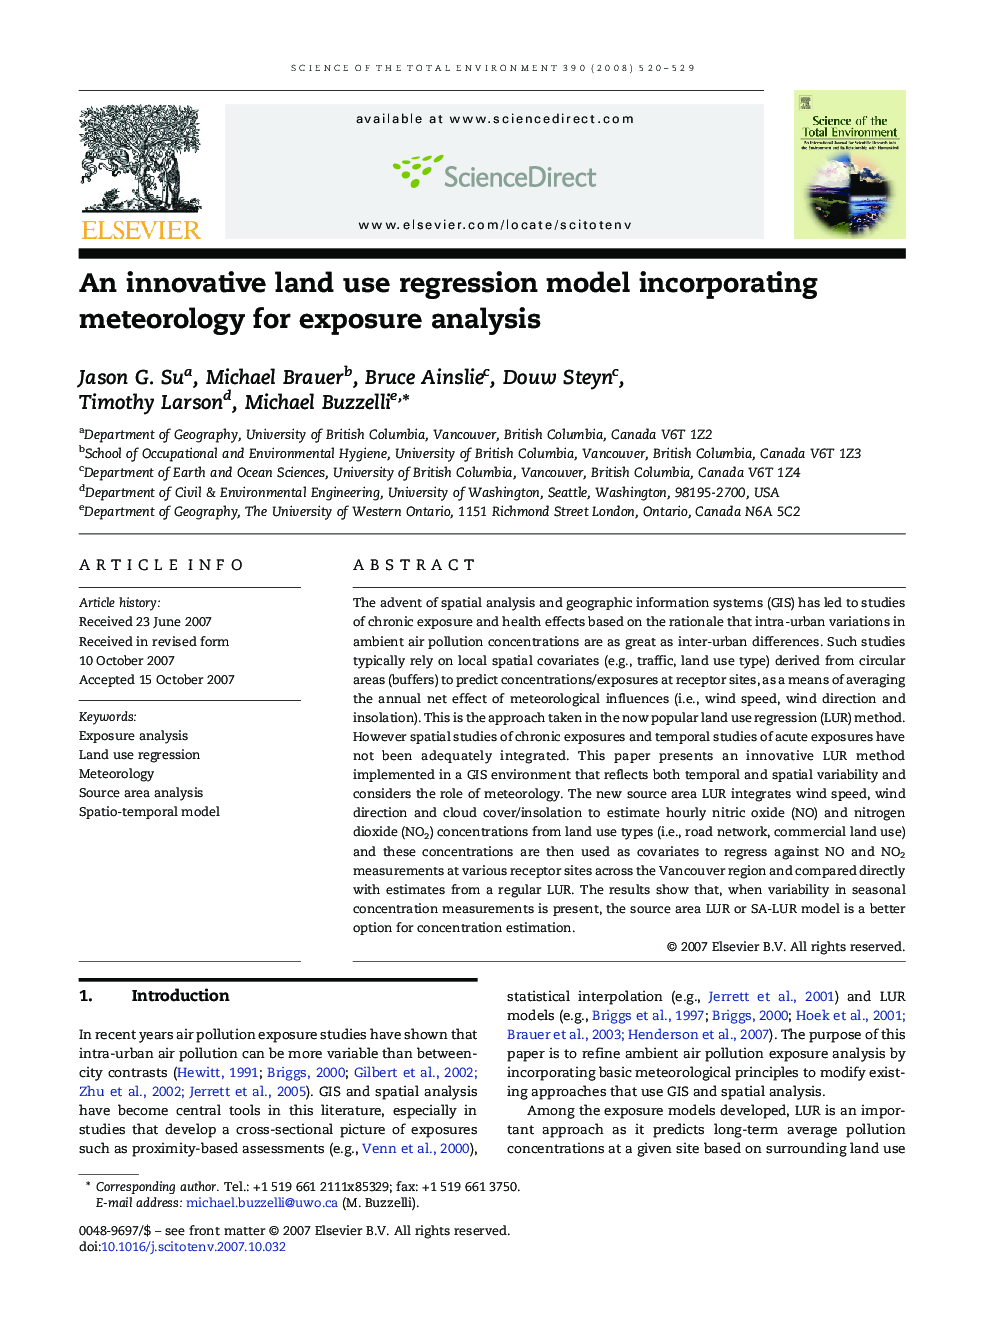 An innovative land use regression model incorporating meteorology for exposure analysis